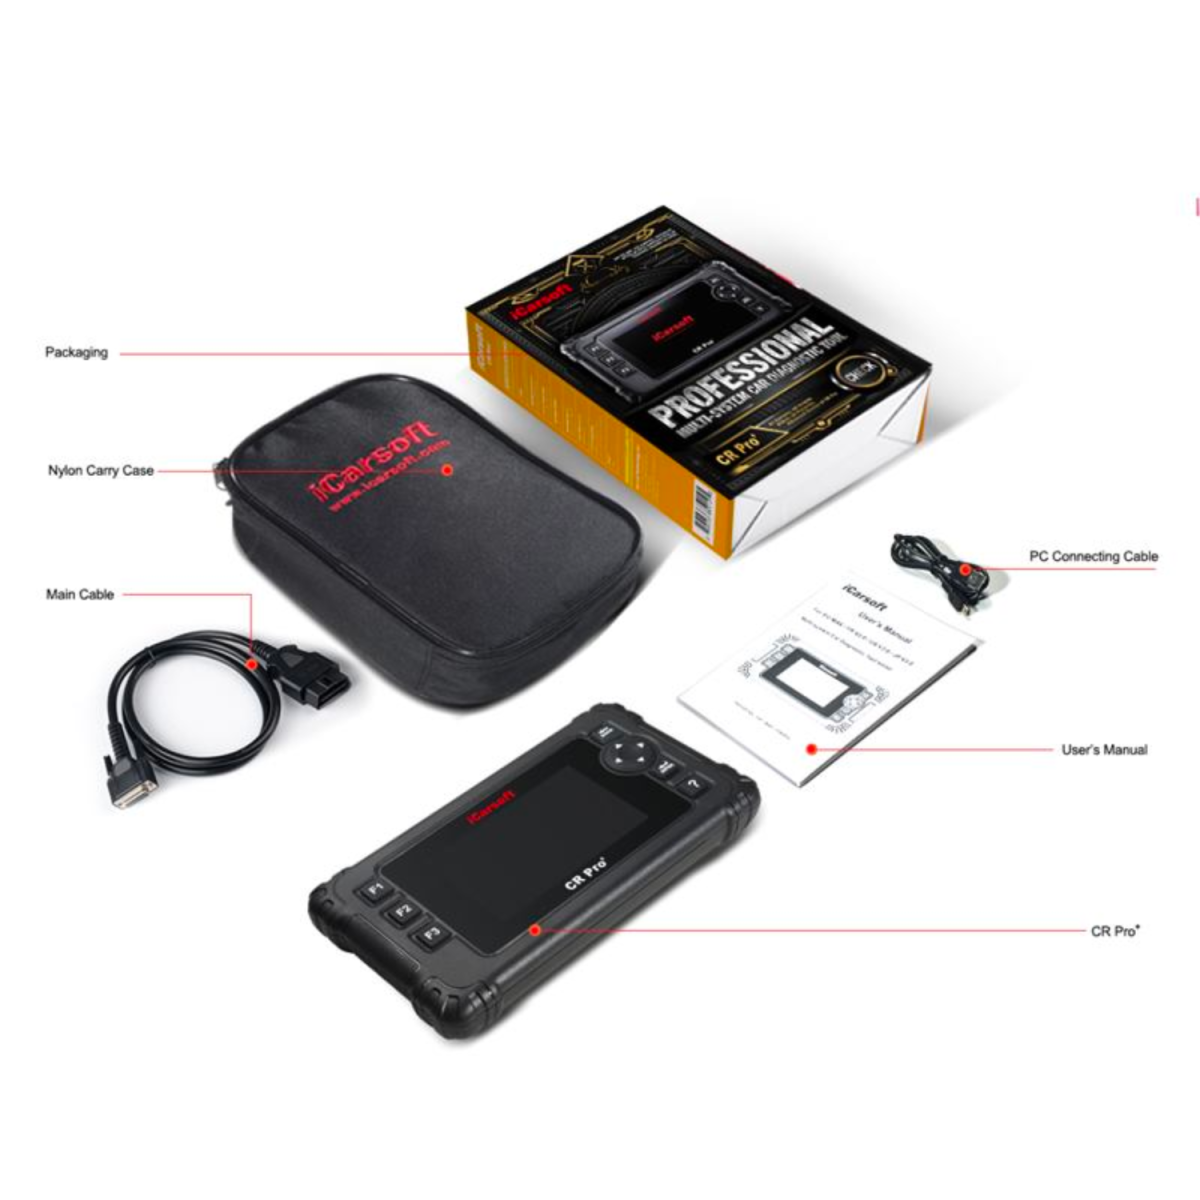 icarsoft crpro plus obd2 scan tool package content